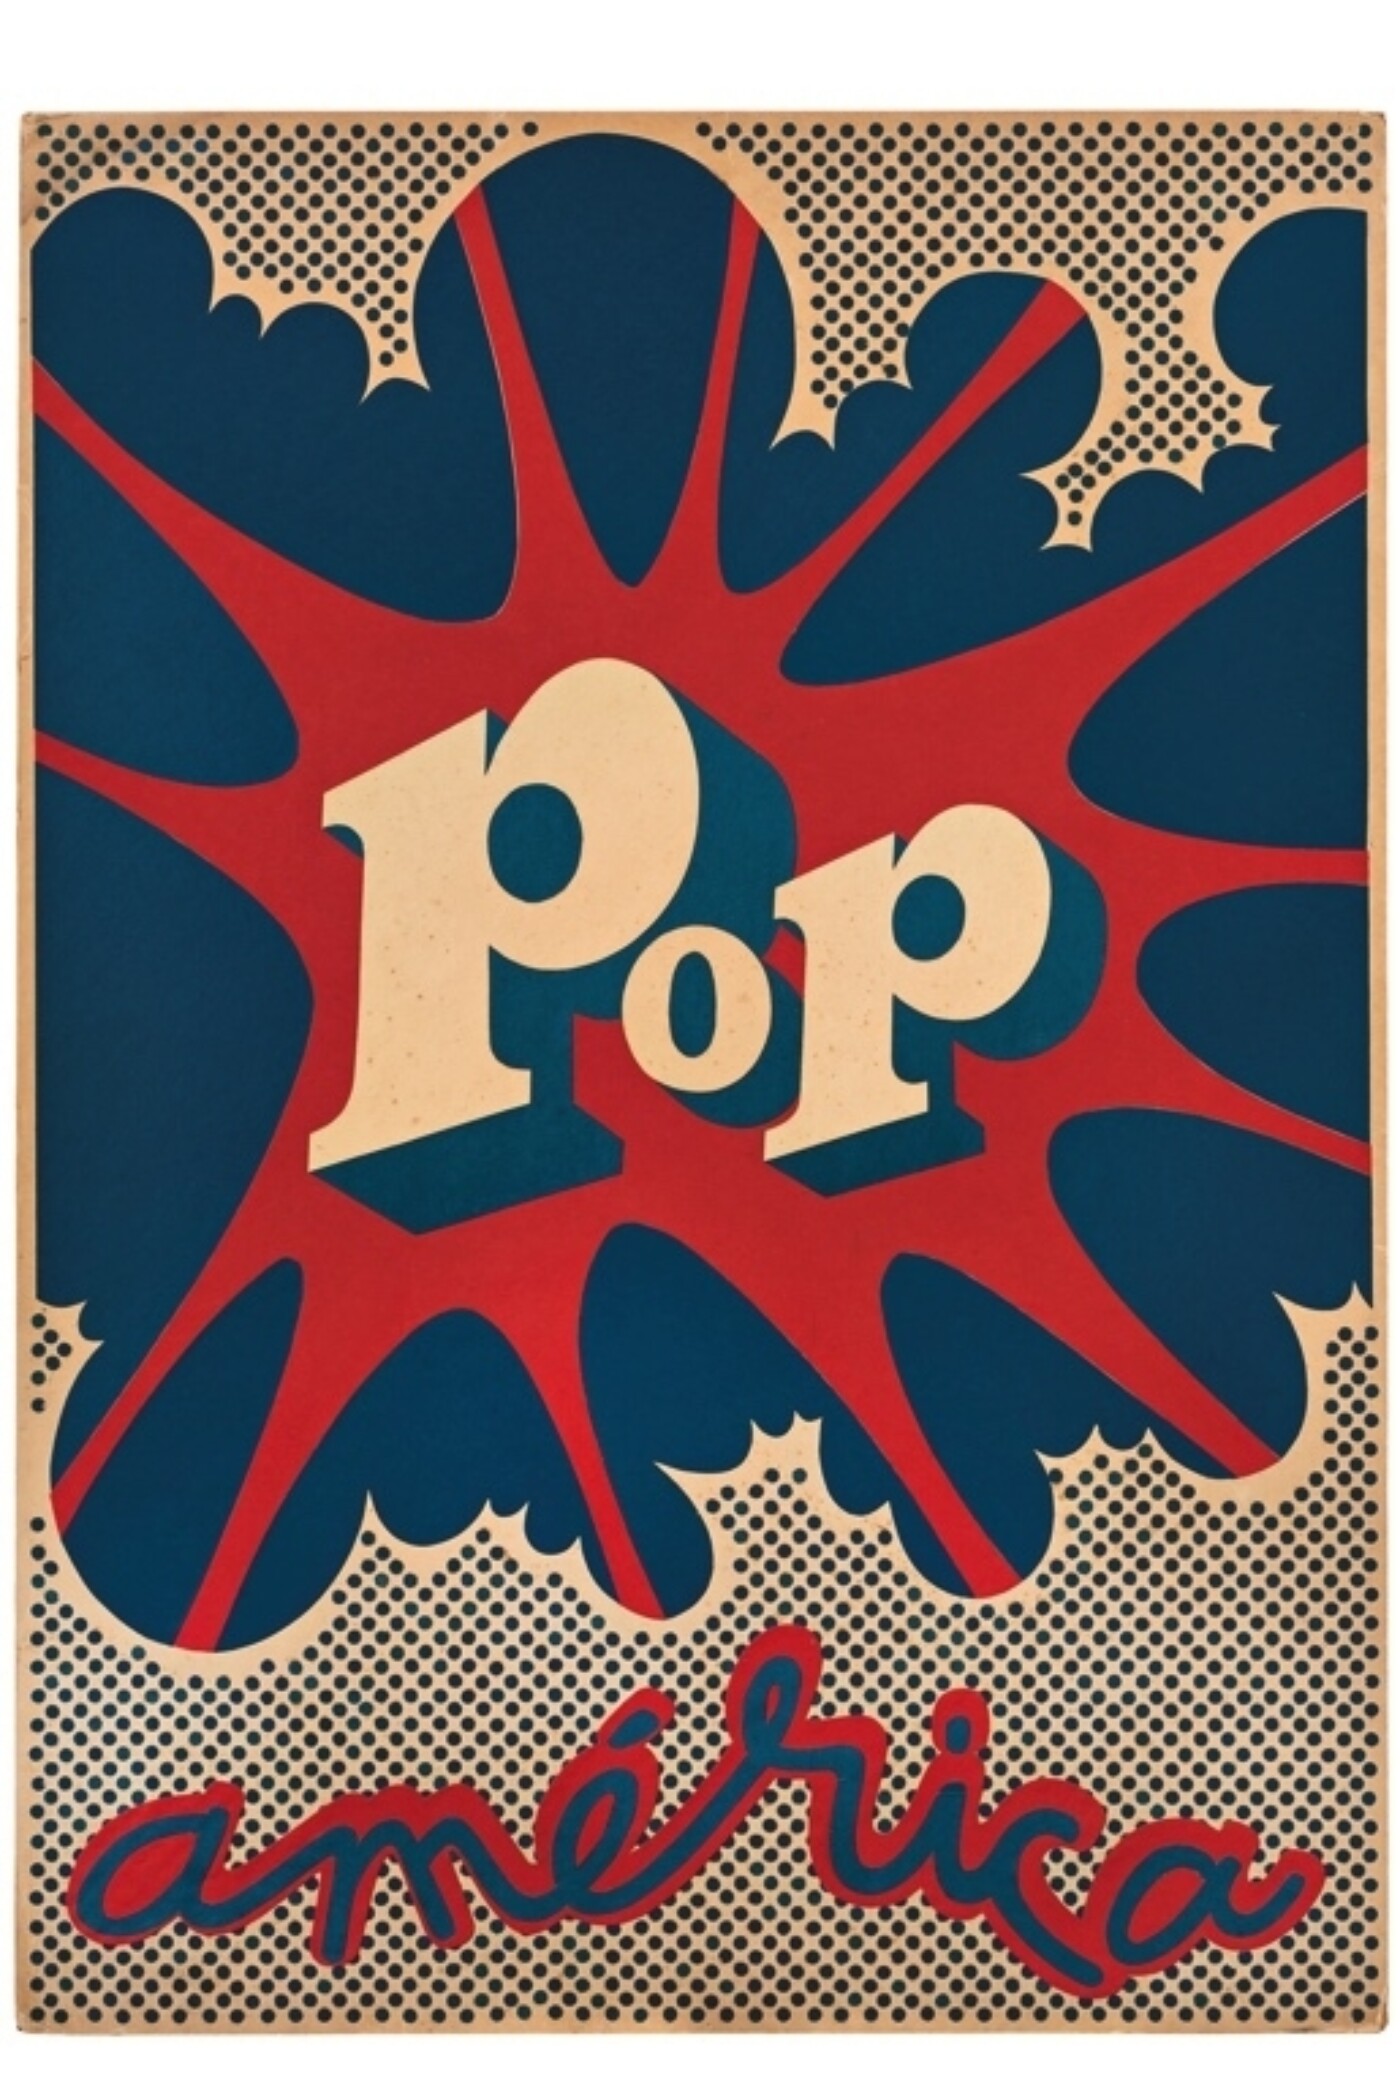 Printed red and blue poster with graphic text by Hugo Rivera-Scott.